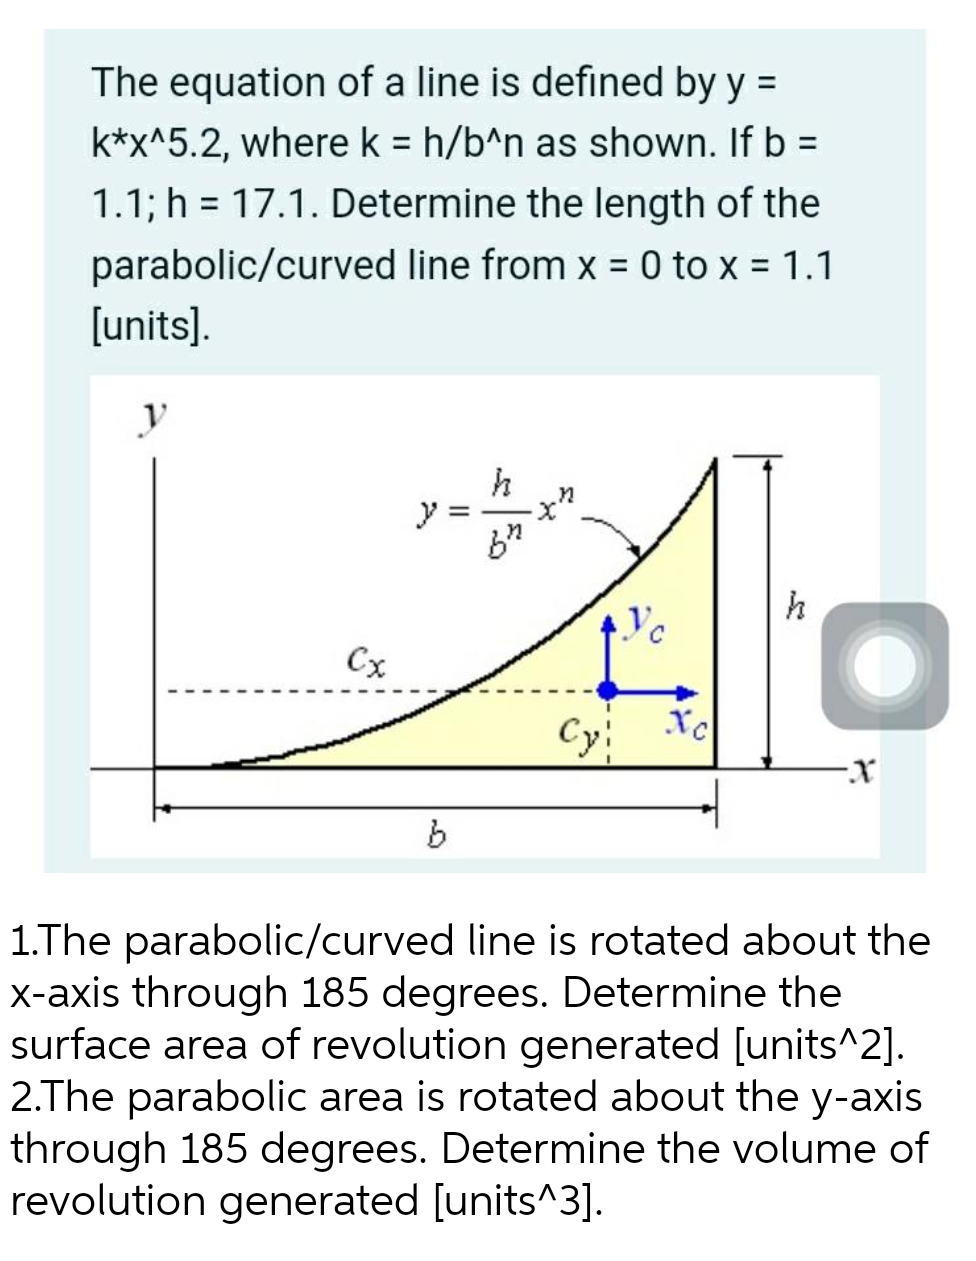 The equation of a line is defined by y =
k*x^5.2, where k = h/b^n as shown. If b =
1.1; h= 17.1. Determine the length of the
parabolic/curved line from x = 0 to x = 1.1
[units].
y
h
y
Cx
O
Xc
Cy!
-X
b
1.The parabolic/curved line is rotated about the
x-axis through 185 degrees. Determine the
surface area of revolution generated [units^2].
2.The parabolic area is rotated about the y-axis
through 185 degrees. Determine the volume of
revolution generated [units^3].